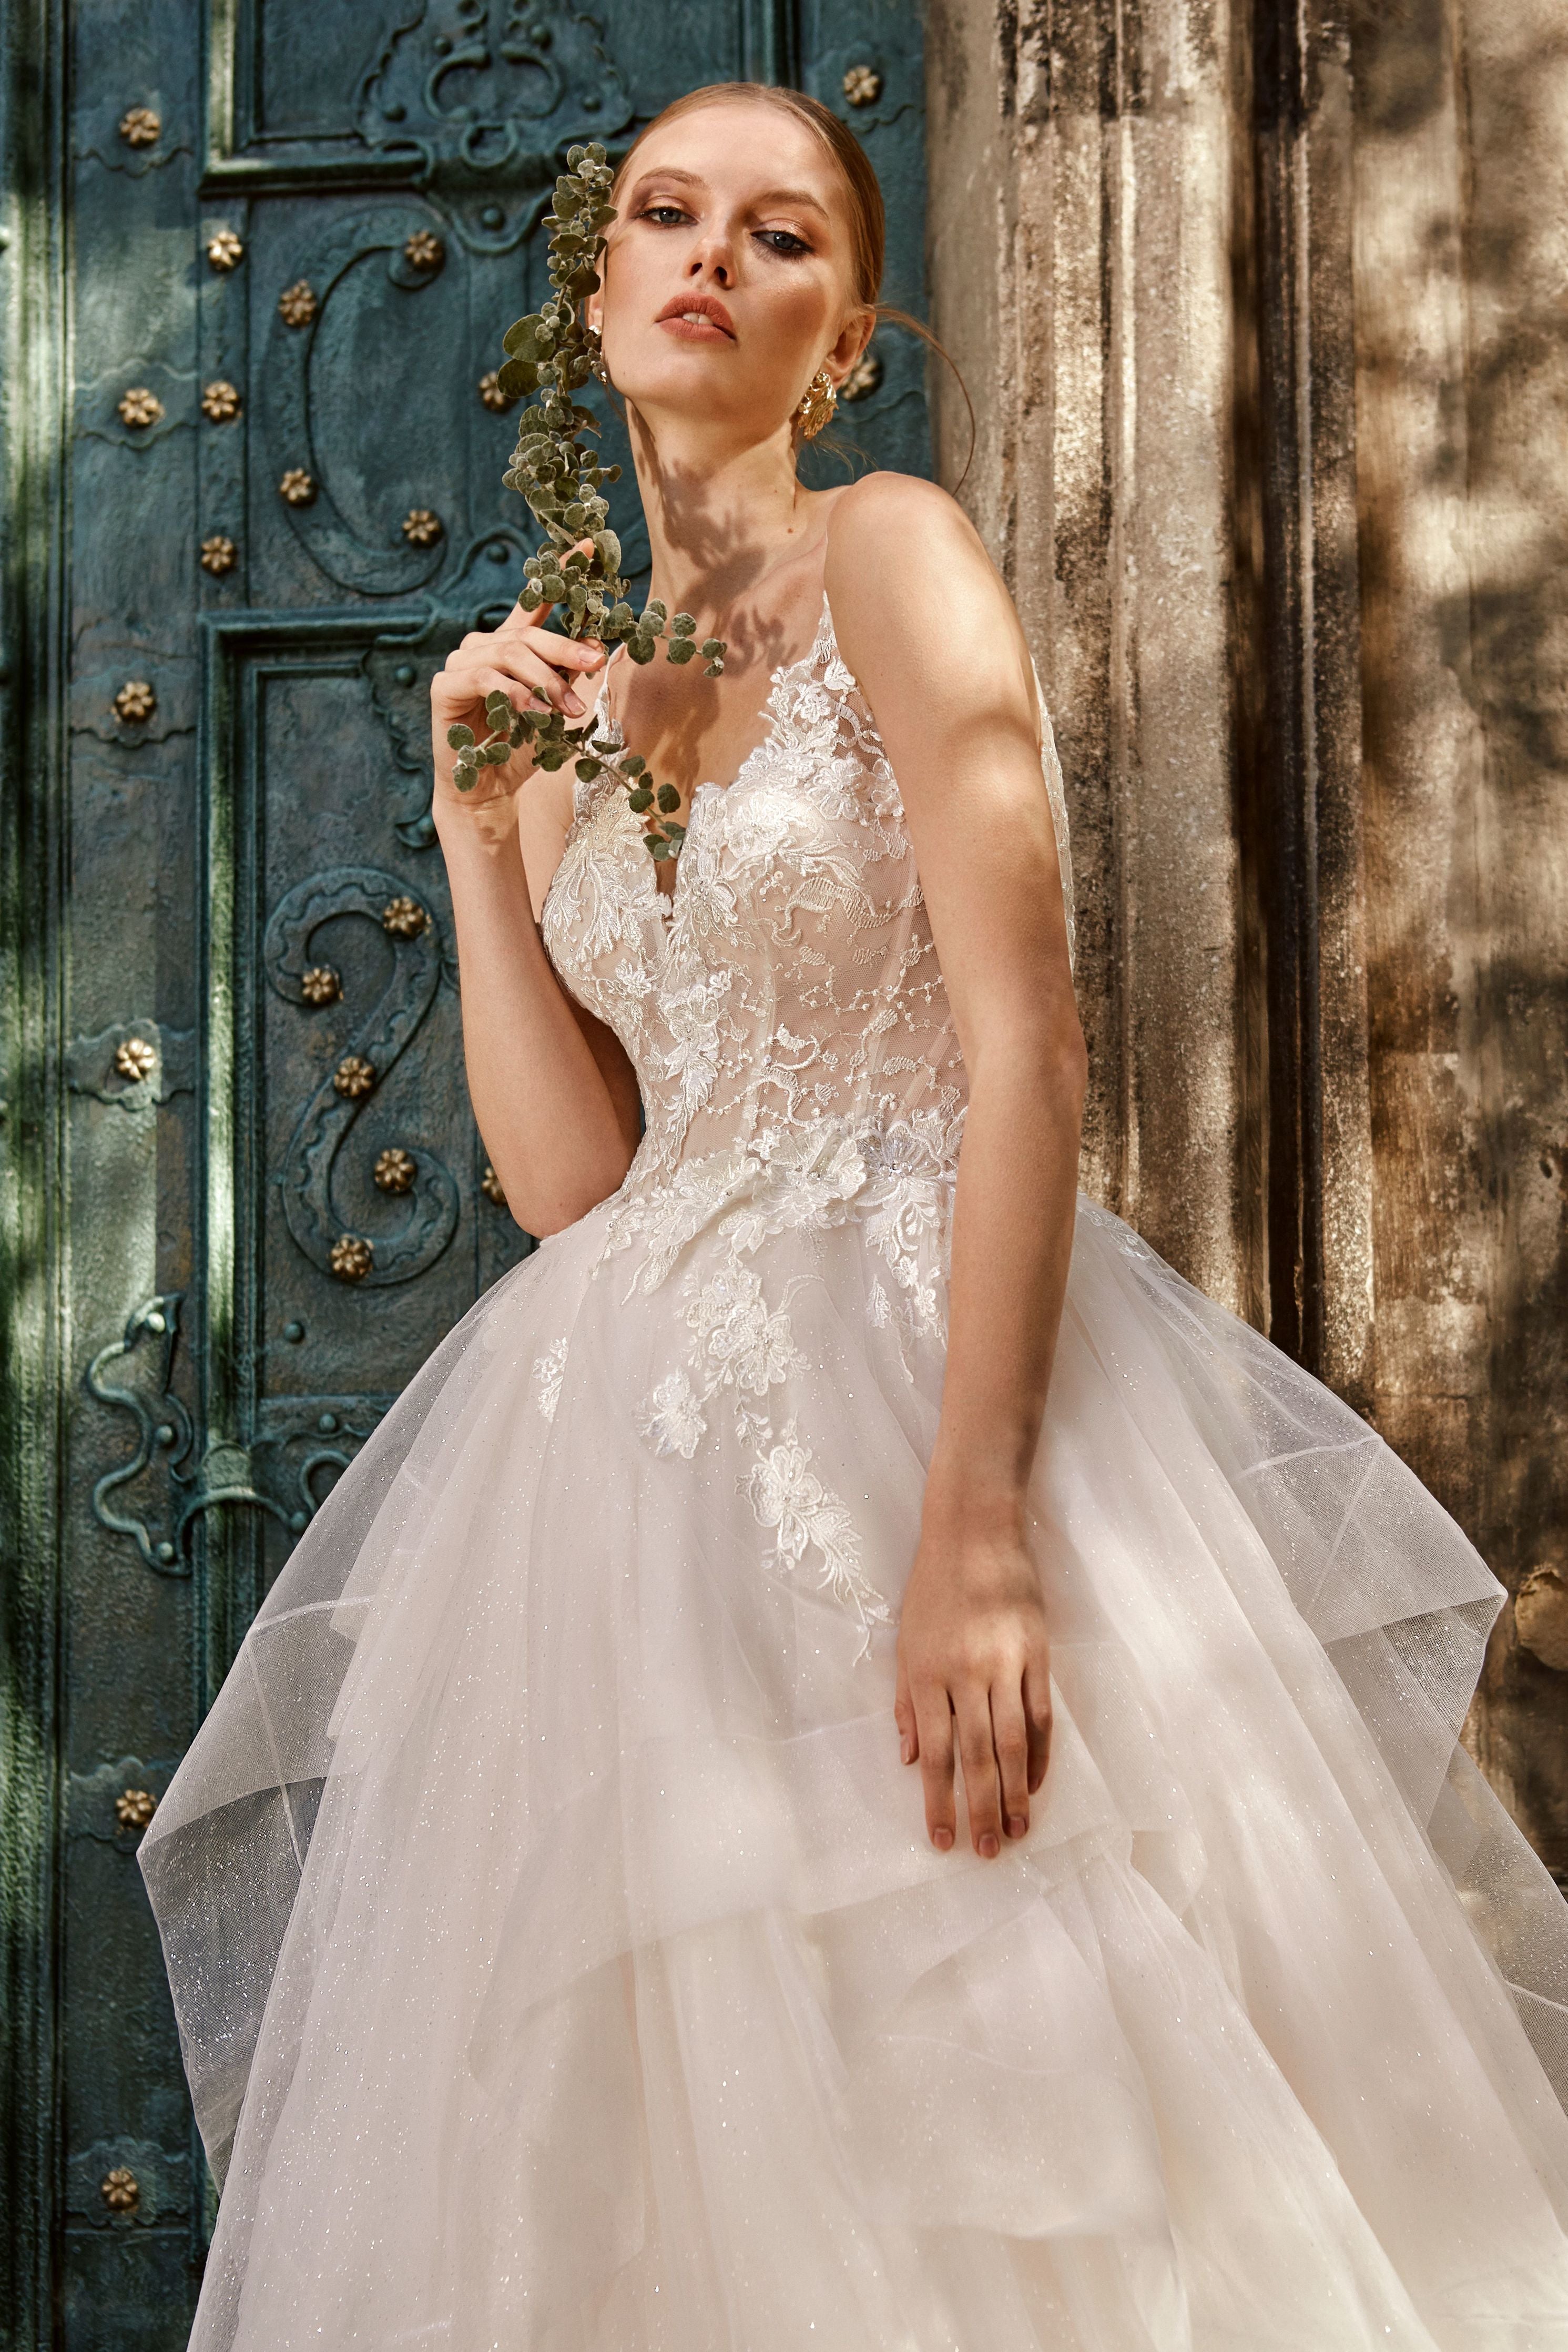 Sonia - Floral Lace Wedding Dress with Ruffled Skirt - Maxima Bridal